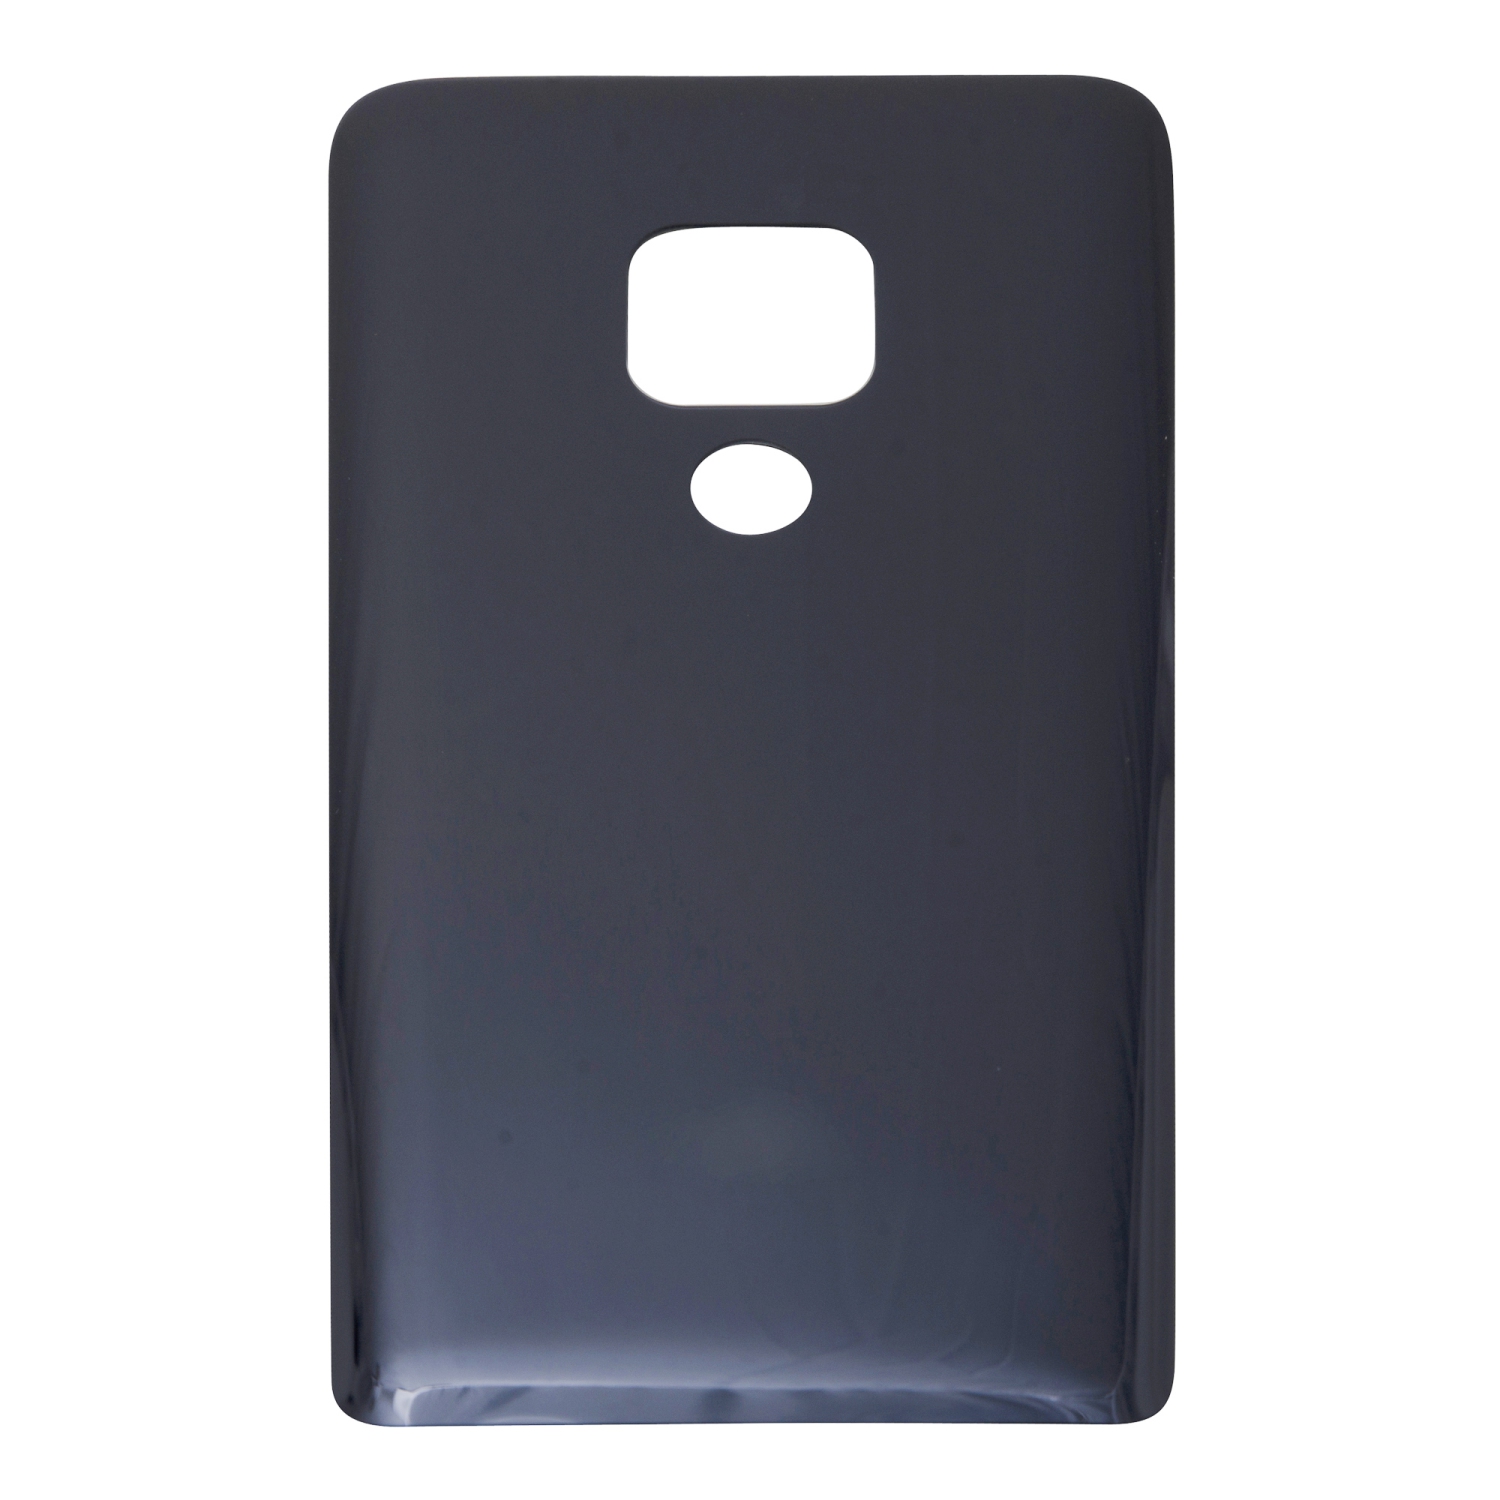 Huawei Mate 20 Battery Back Cover Housing Replacement - Black